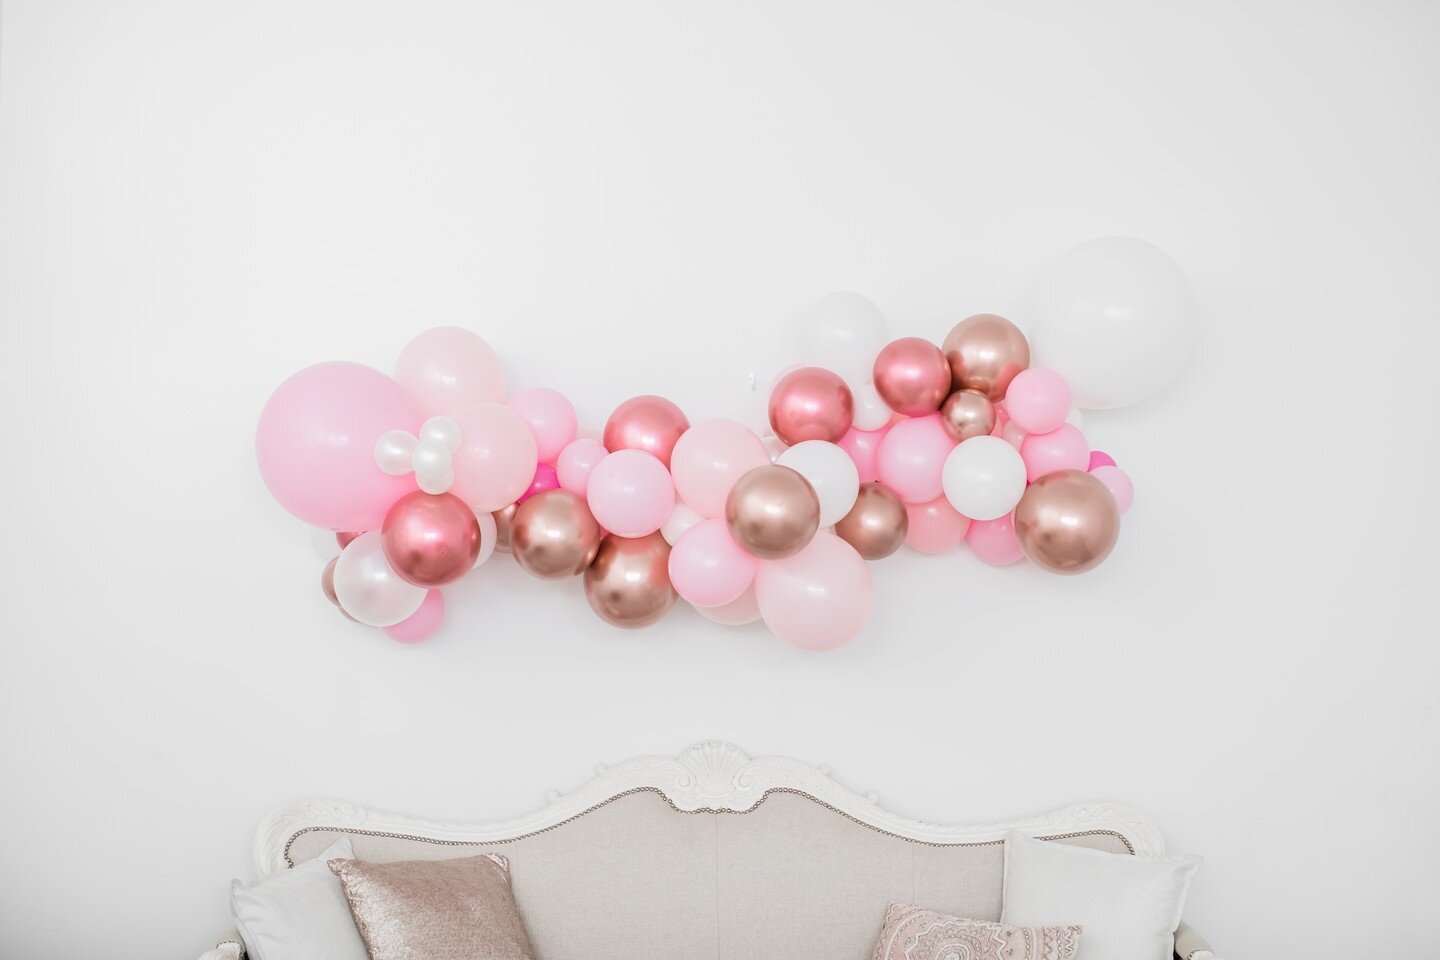 Our medium sized balloon garland fits perfectly above our couch💕 All we need to know is what colors you prefer for your garland and it will be hung before the start of your event by our team!
*
*
*
#ohiopartyvenue #ohioeventspace #ohioeventvenue #br